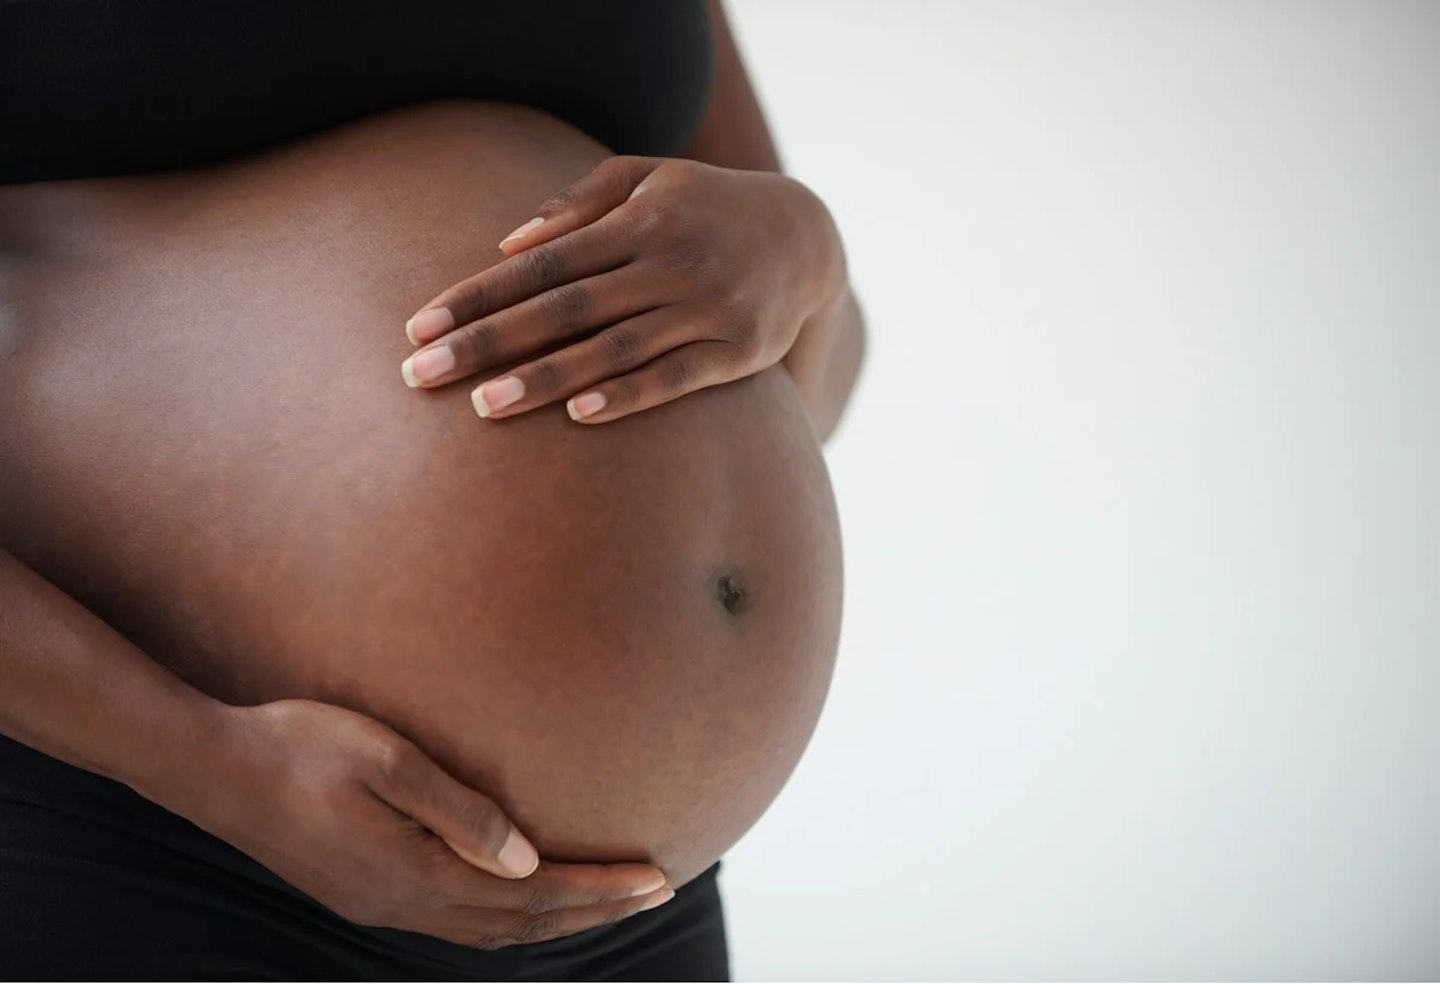 28 weeks pregnant: advice, symptoms and what to expect